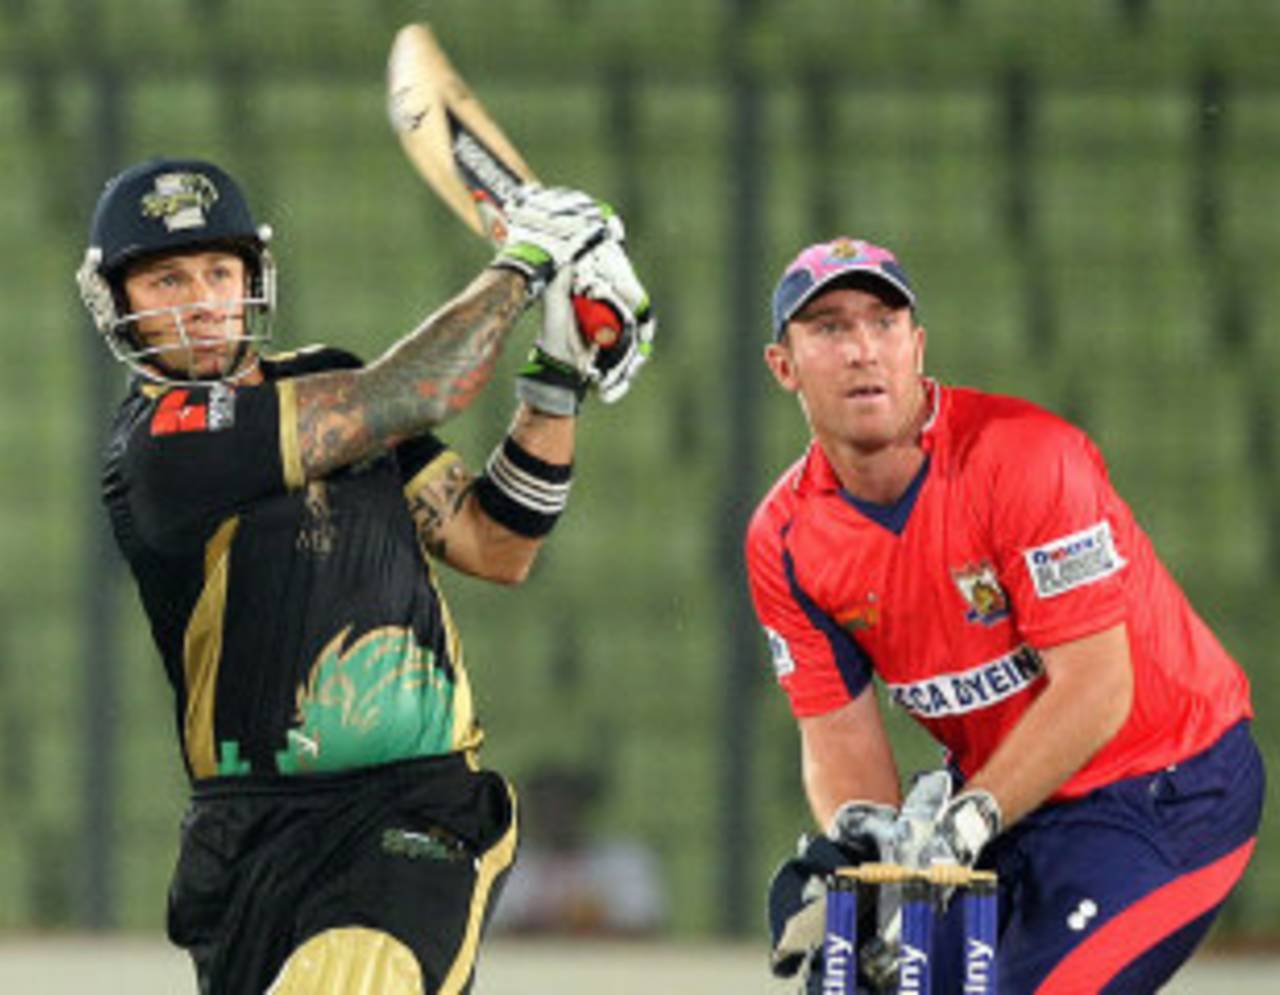 Somerset's Peter Trego played in BPL 2012 but was not bought this time&nbsp;&nbsp;&bull;&nbsp;&nbsp;BPL T20